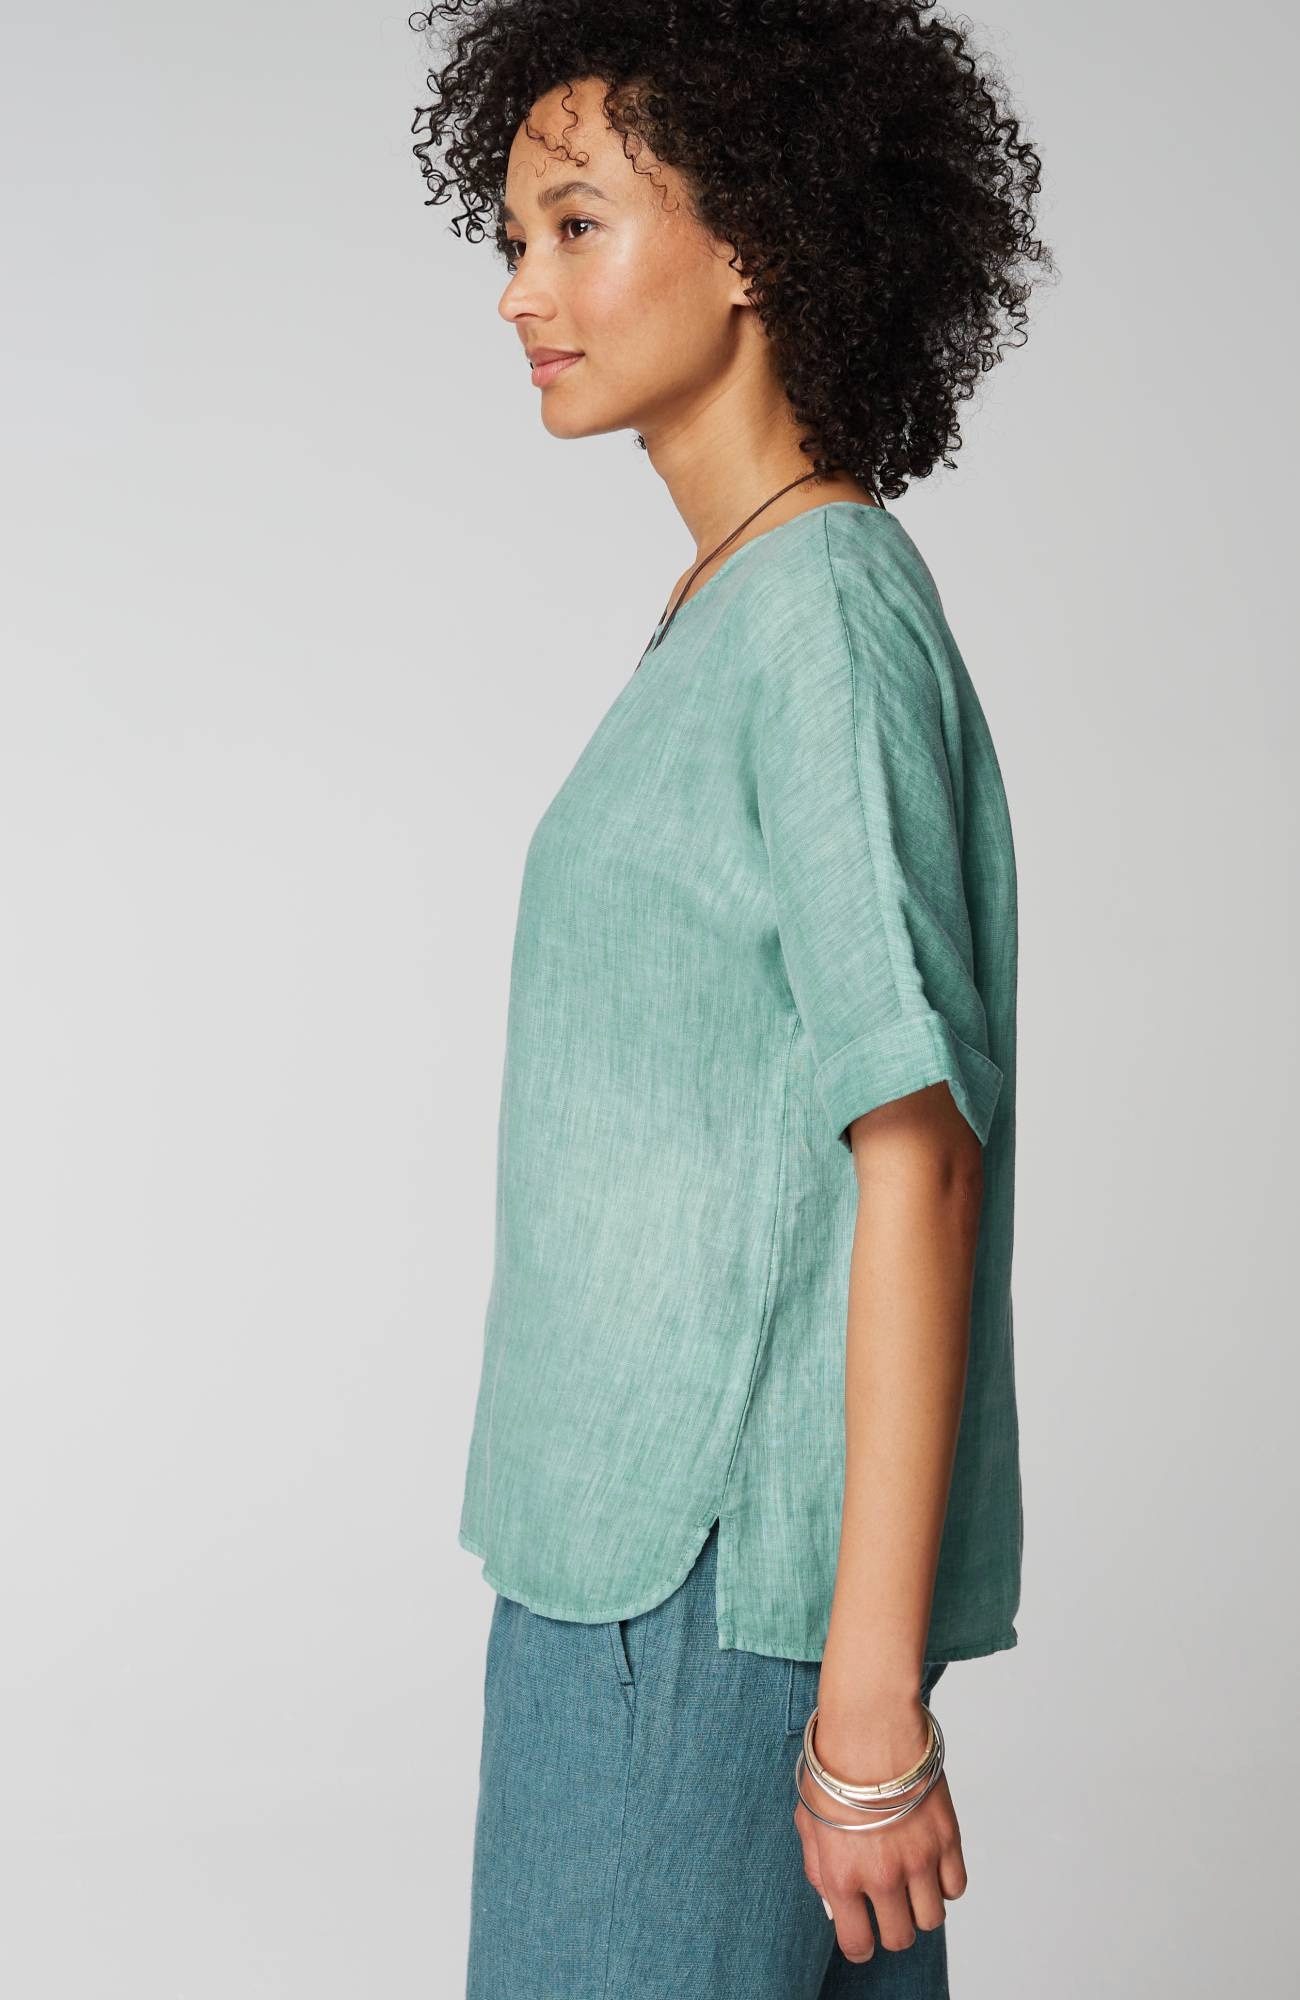 Pure Jill Relaxed Linen Popover